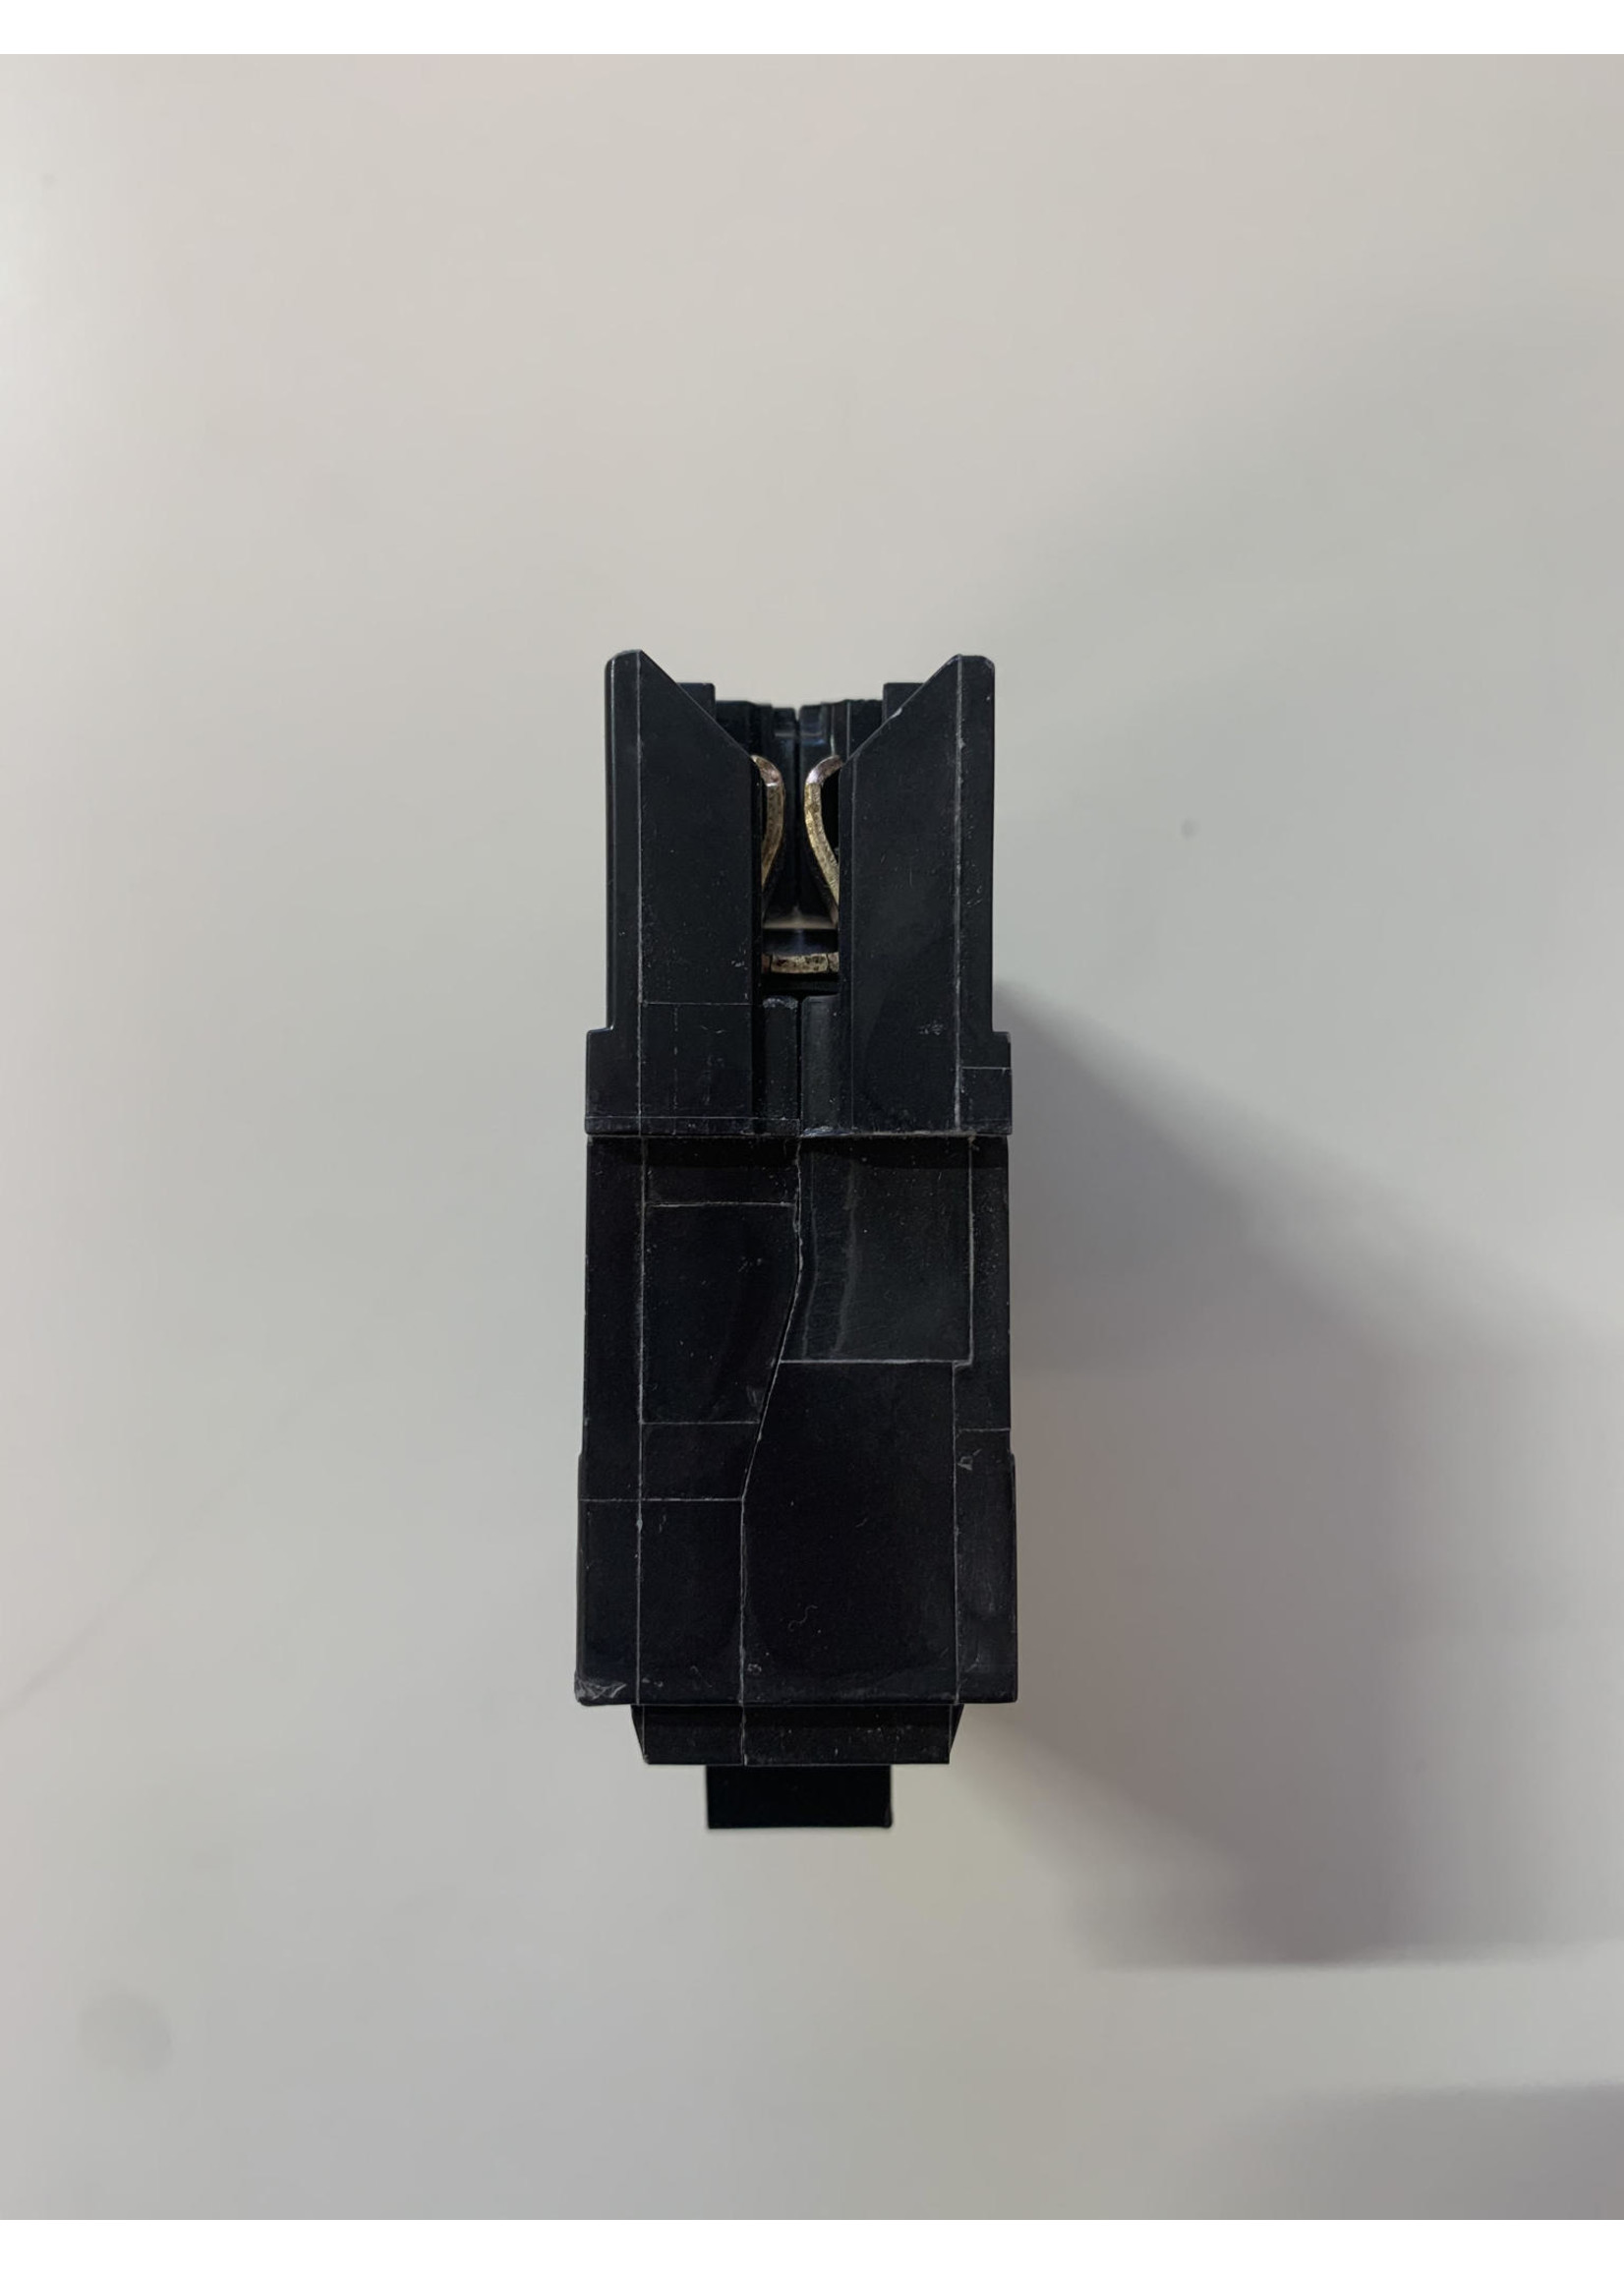 GE BREAKER THICK POLO 1  30 AMPS  (THQL1130)